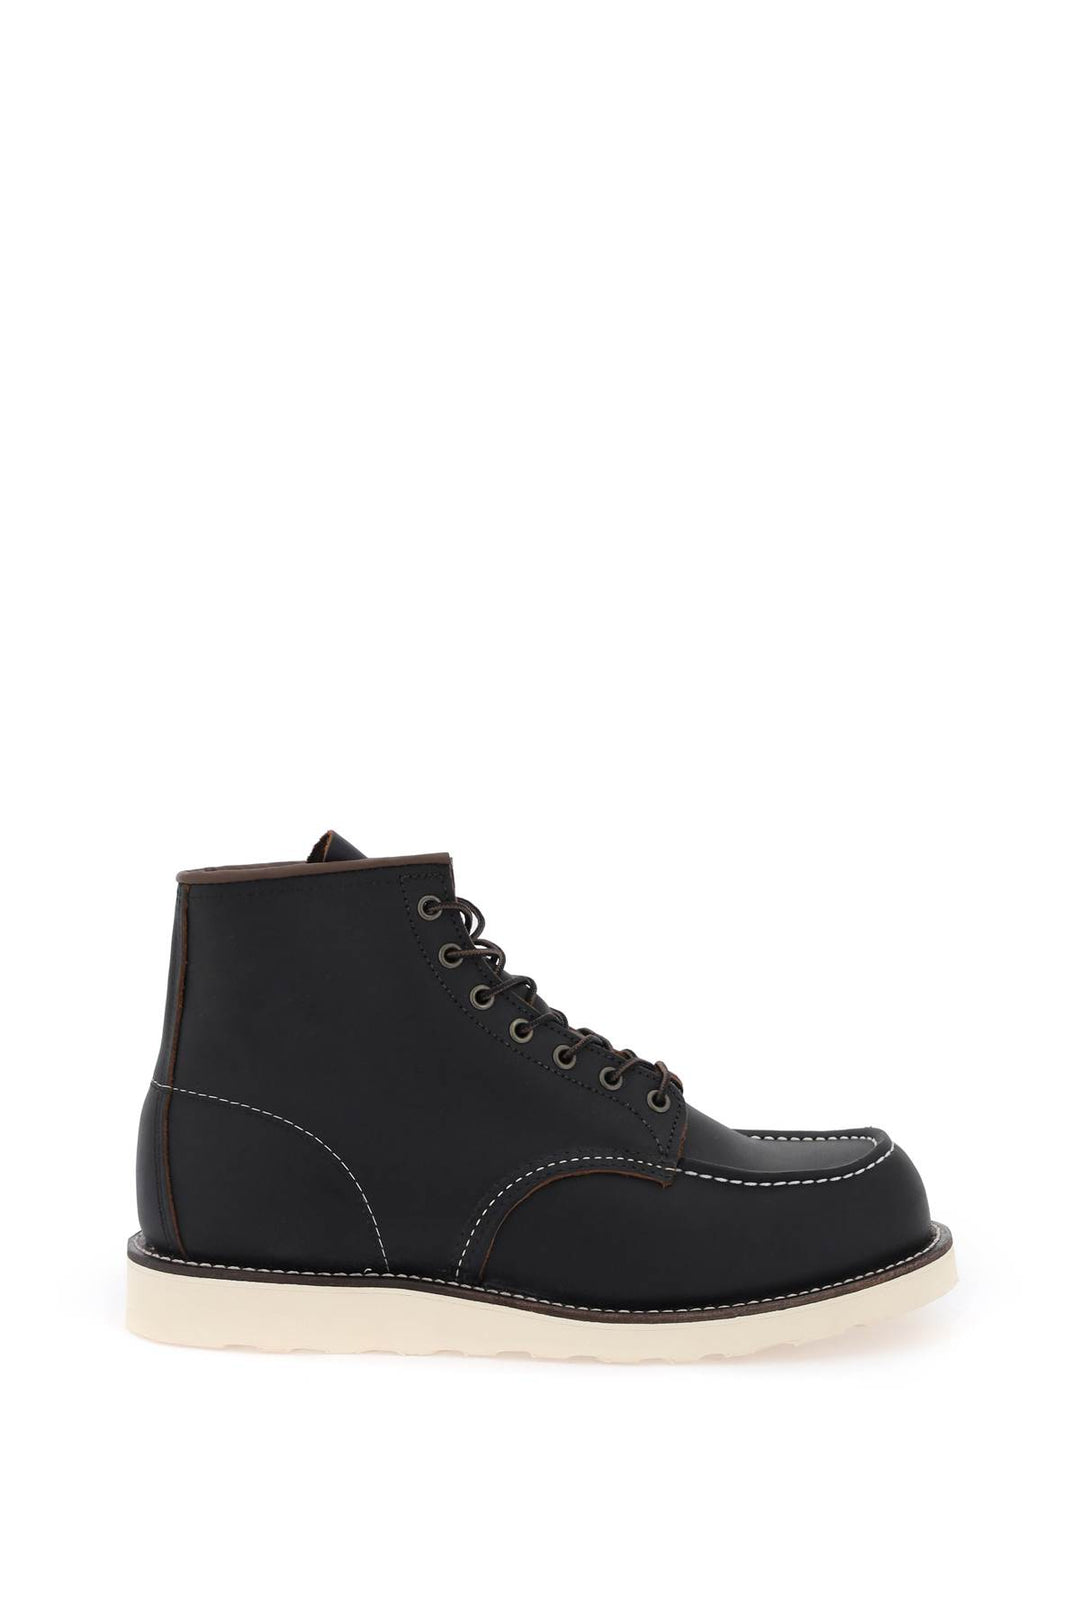 Red Wing Shoes Classic Moc Ankle Boots   Nero